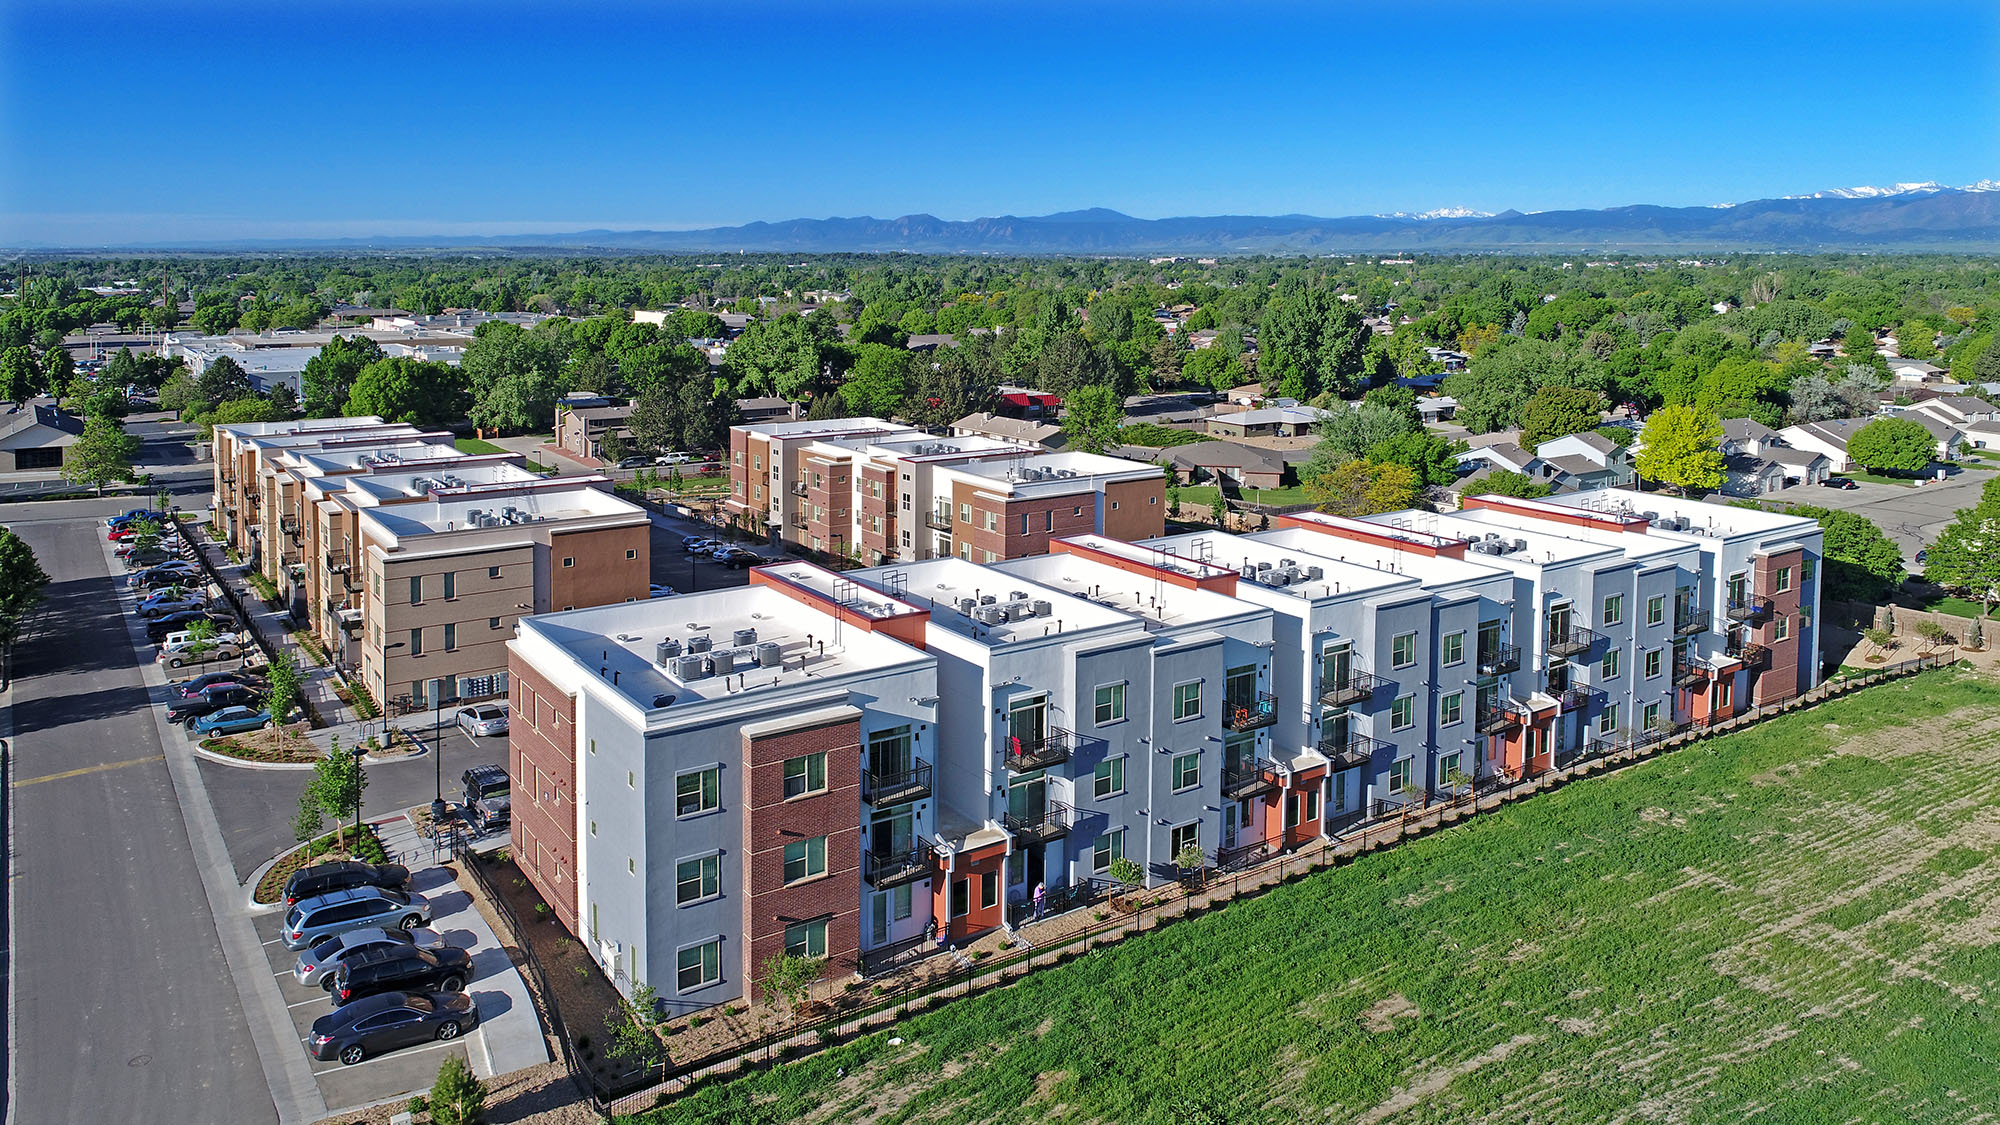 bird's eye view of crissman community with mountains in background